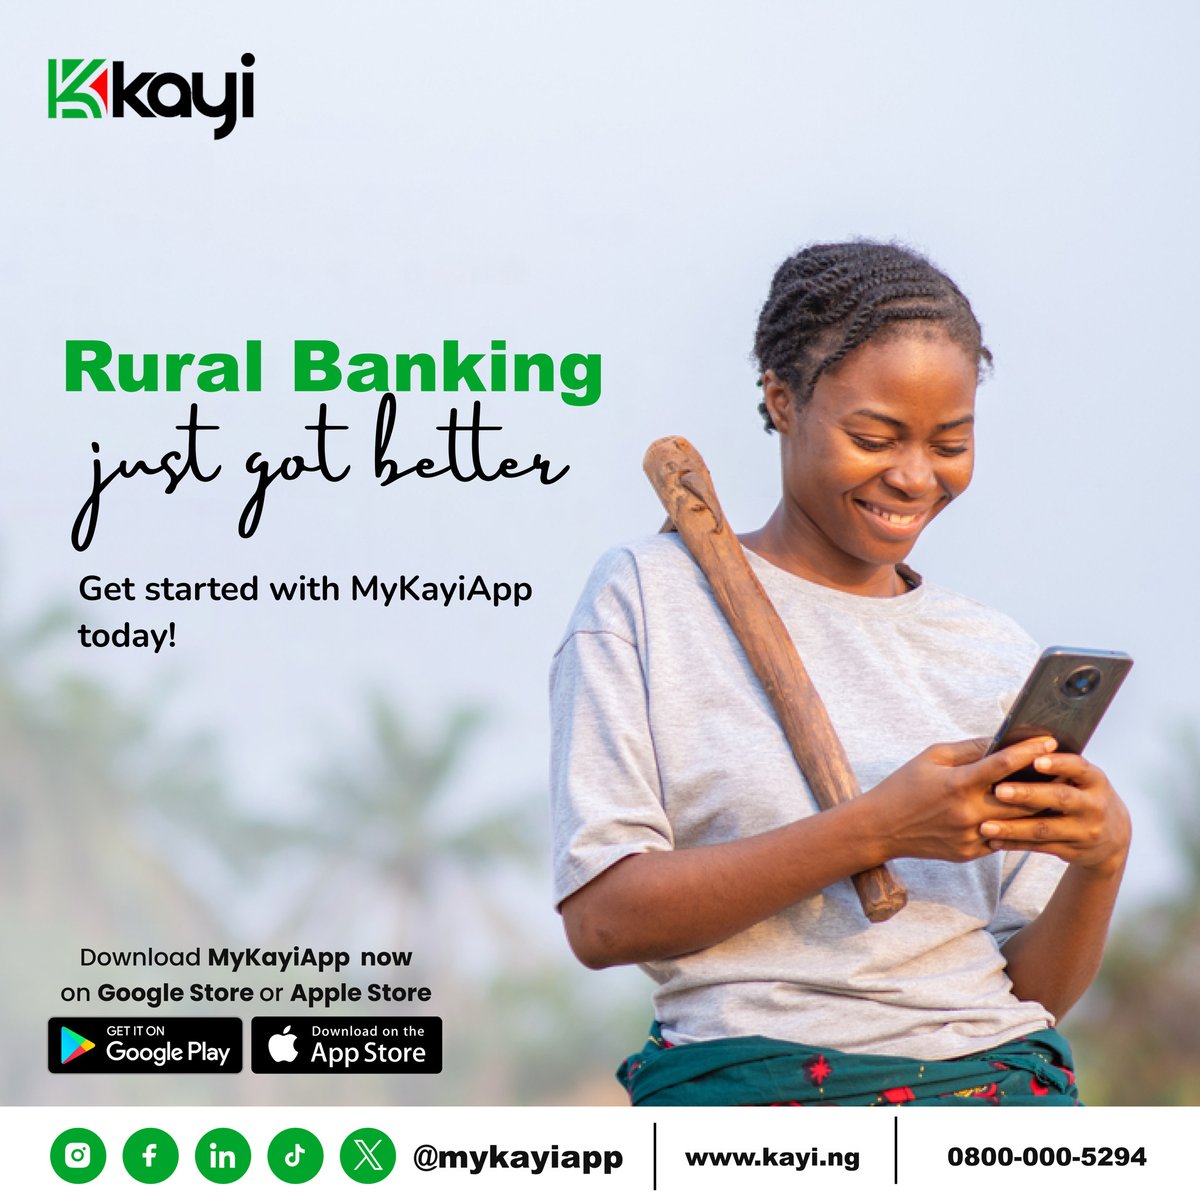 Transform rural banking with Kayiapp! Step into a modern era of financial services by downloading the Kayiapp from the Apple Store or Play Store today. 

#MyKayiApp #NowLive #Kayiway #DownloadNow #Bankingwithoutlimits #downloadmykayiapp